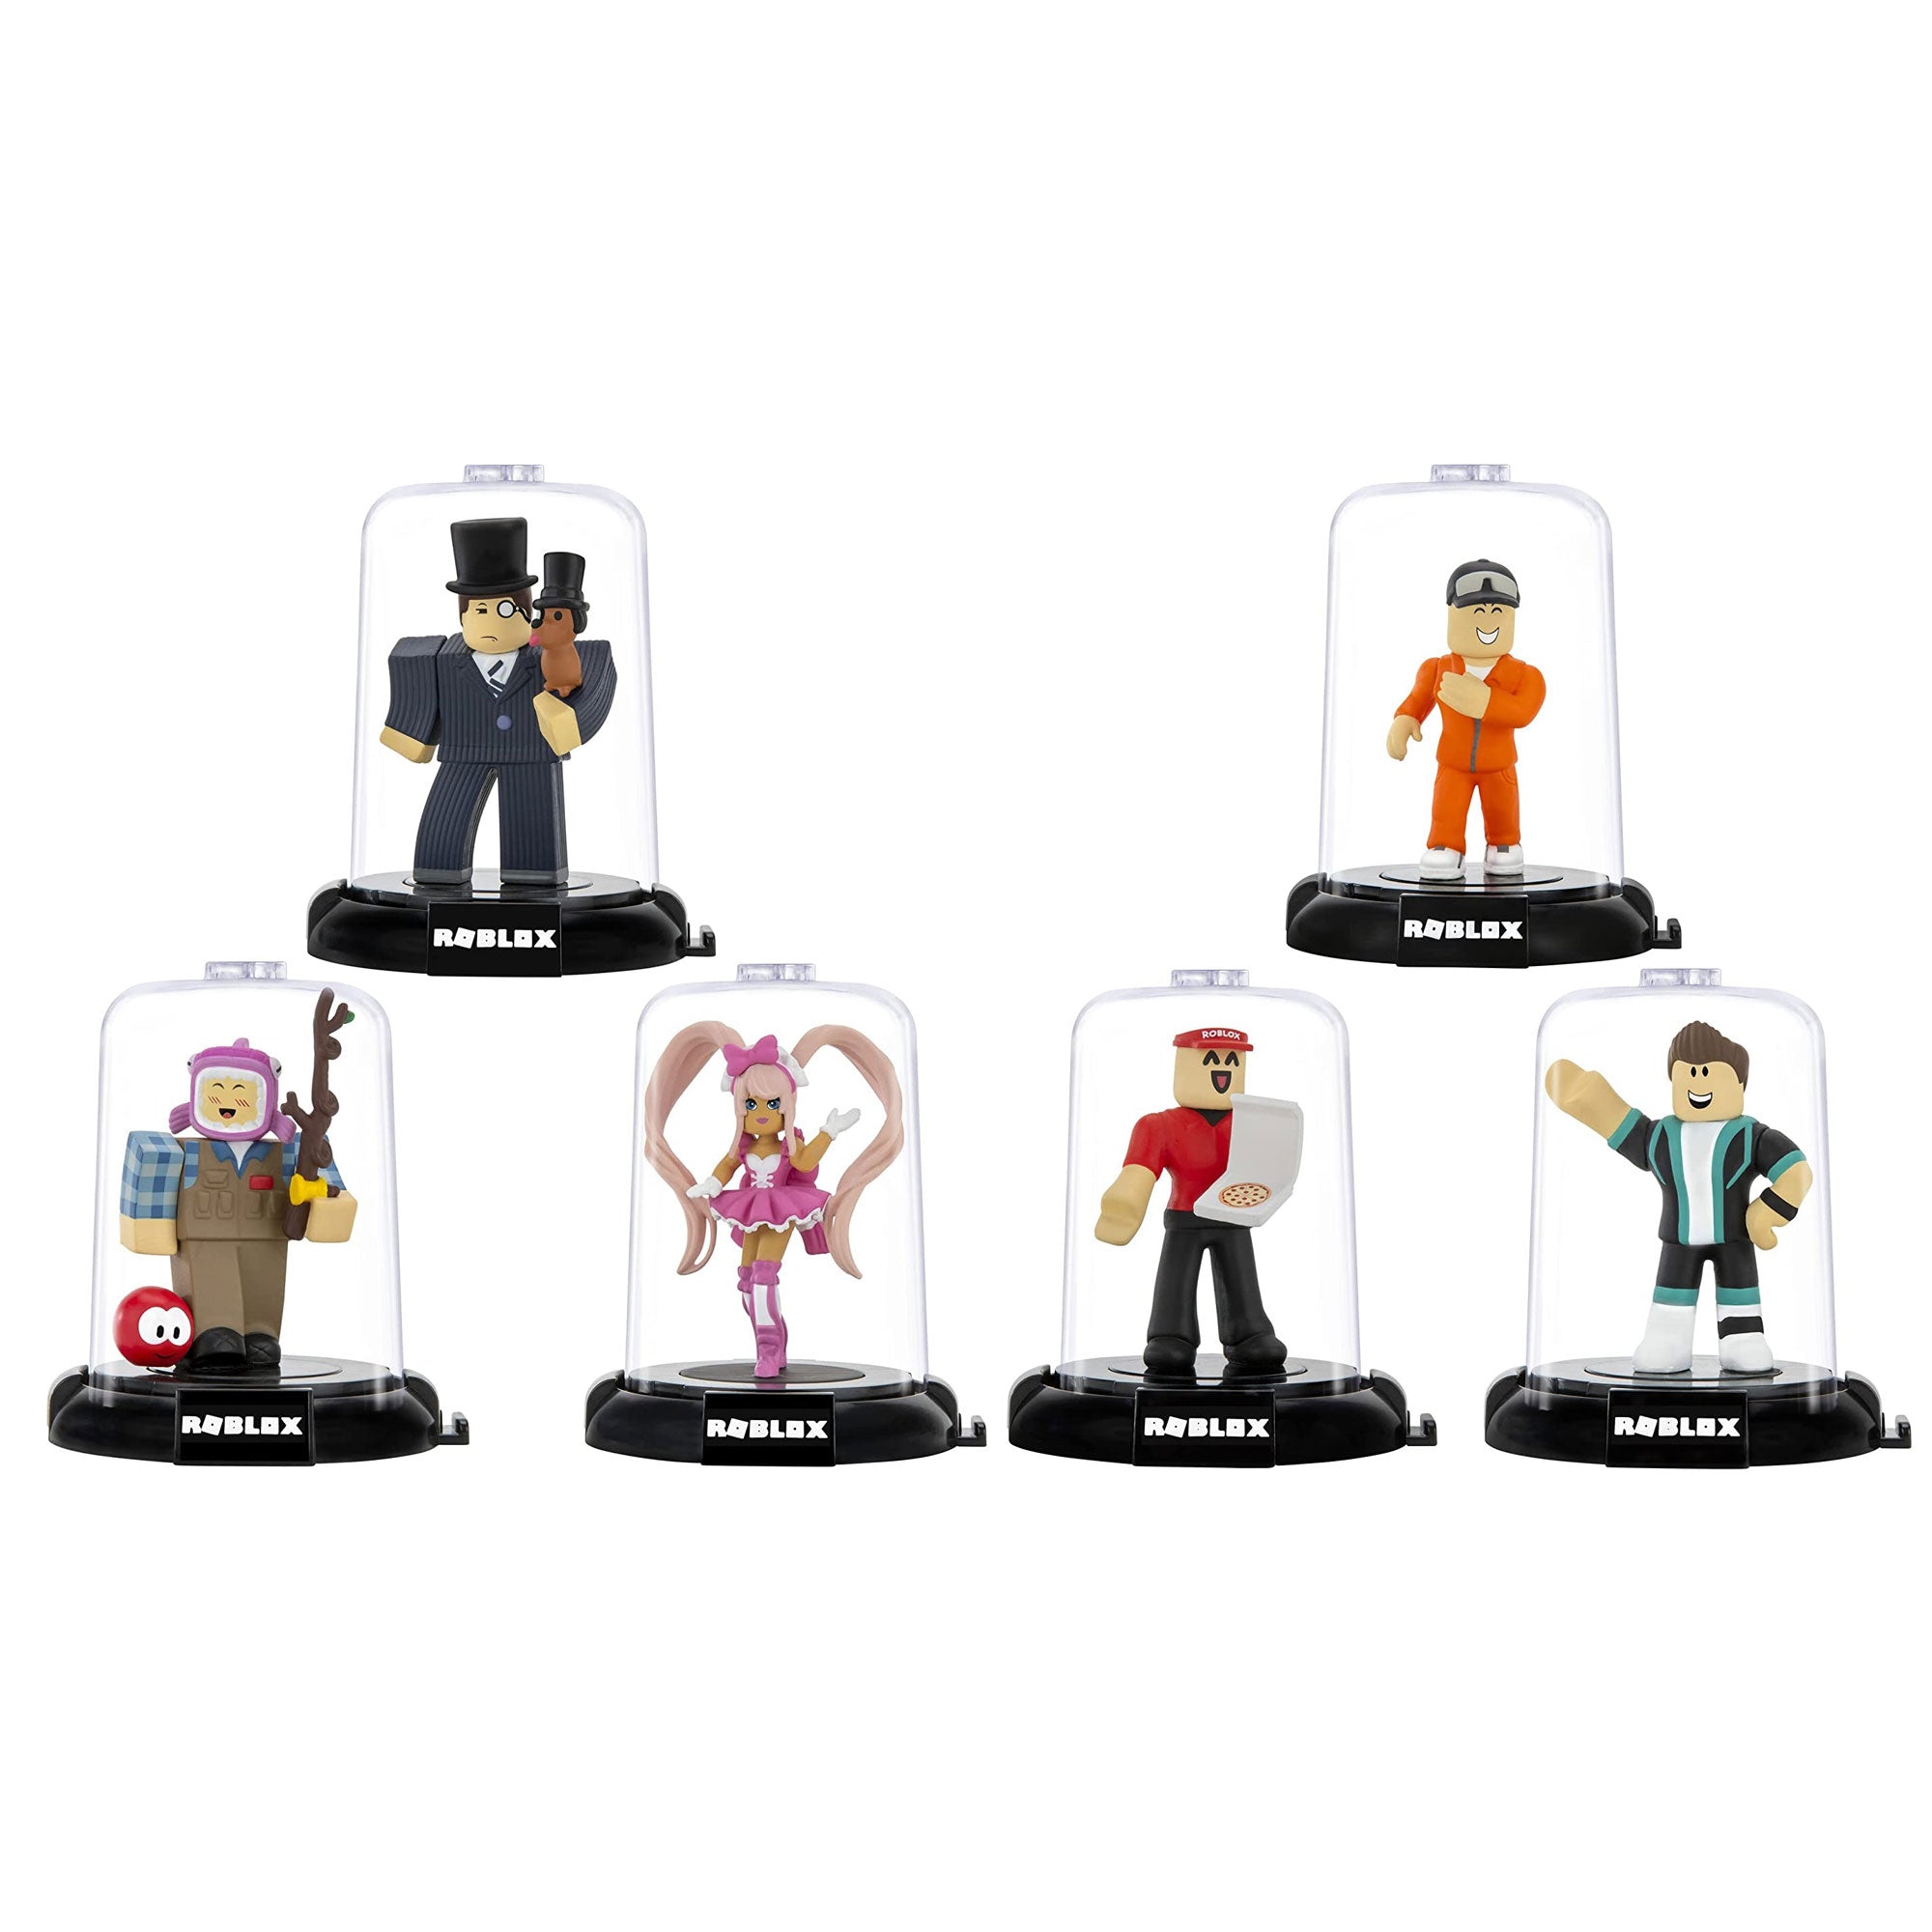 Roblox Figure, 2,5 Inches, Assortment, 1 Count